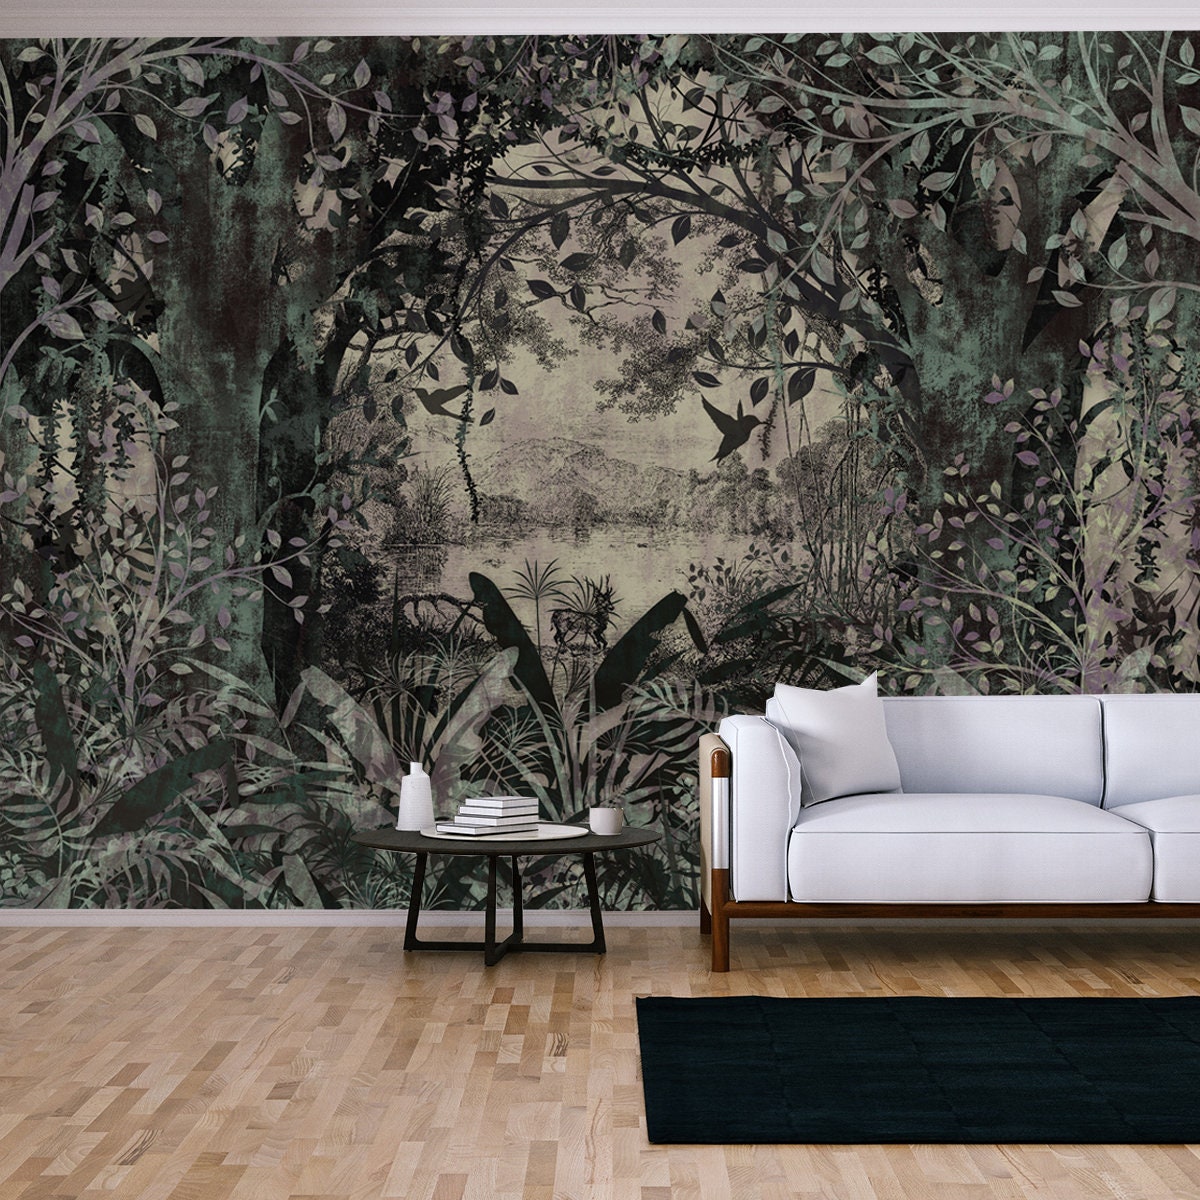 Landscape Wallpaper in Classic Old Style Vintage Wallpaper Living Room Mural